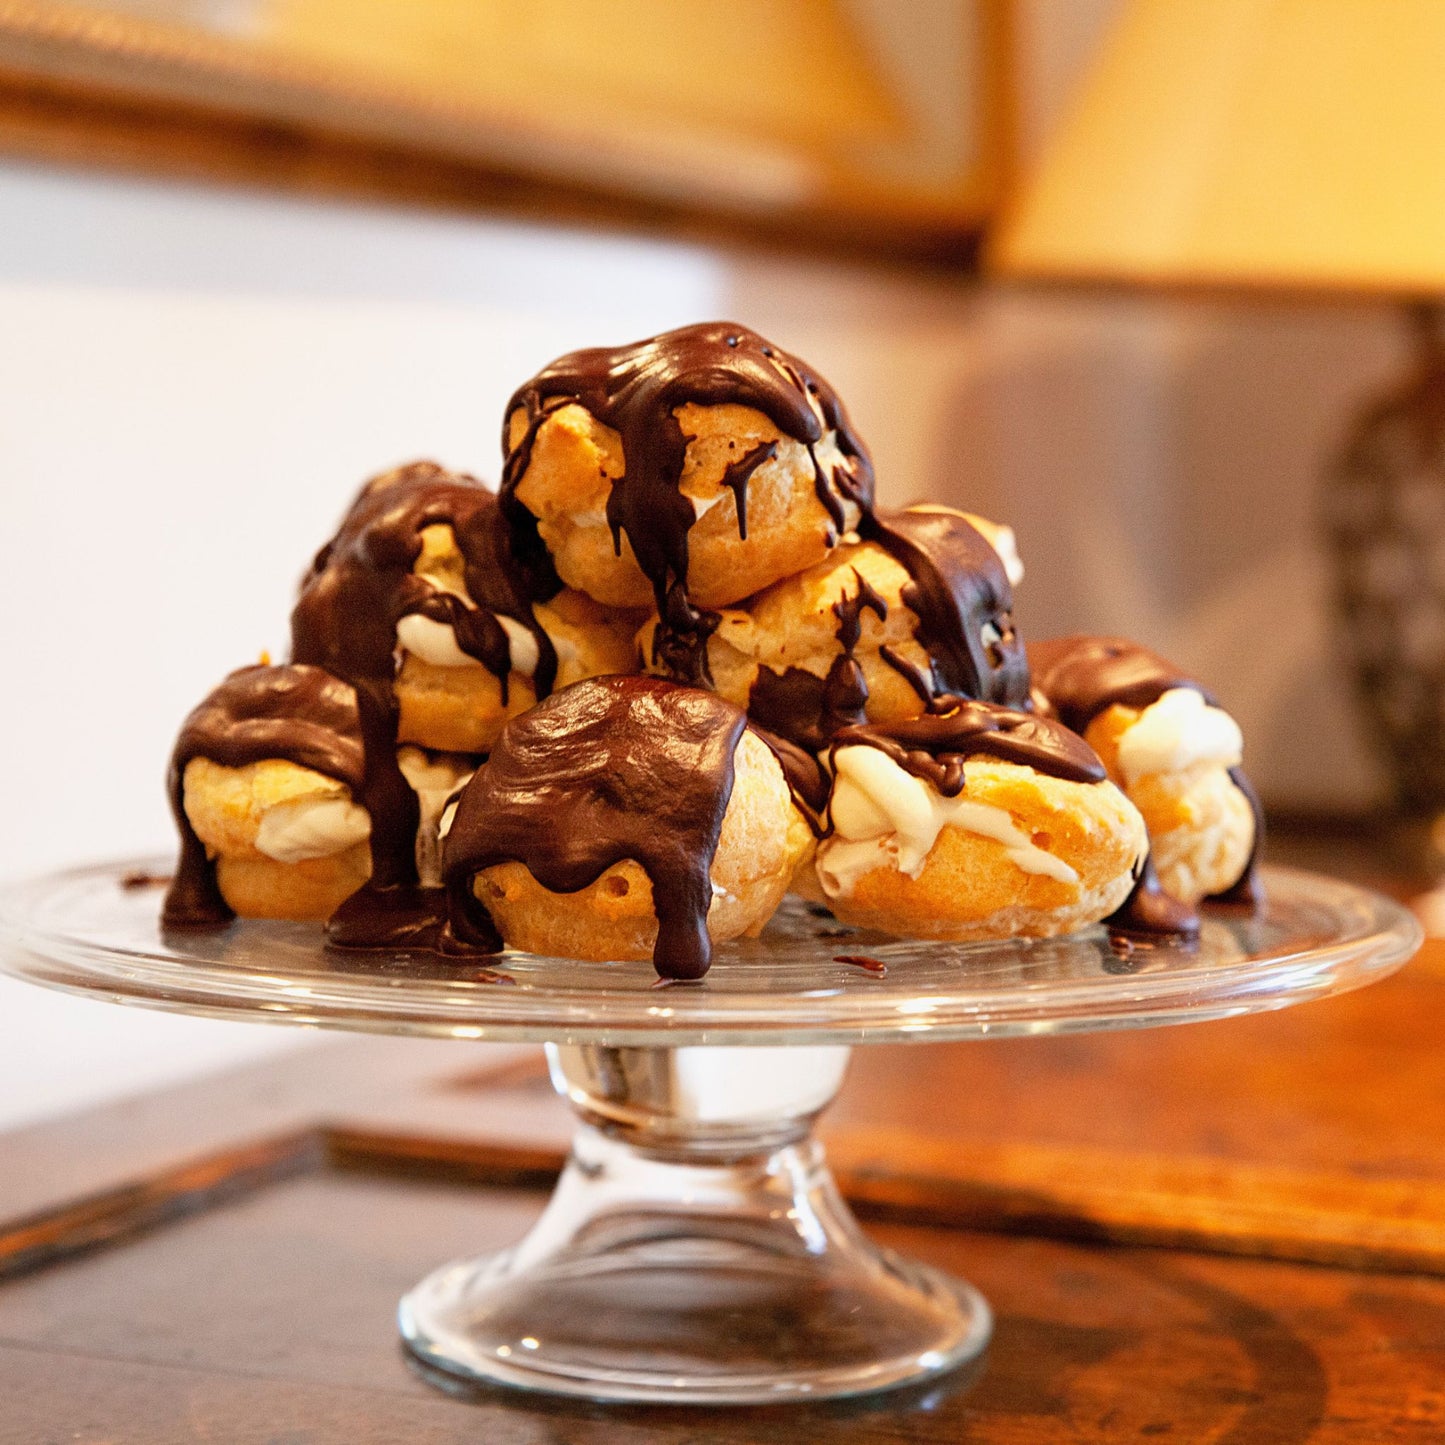 Profiteroles in a tower on a glass cake stand made with Choux pastry, cream and chocolate sauce